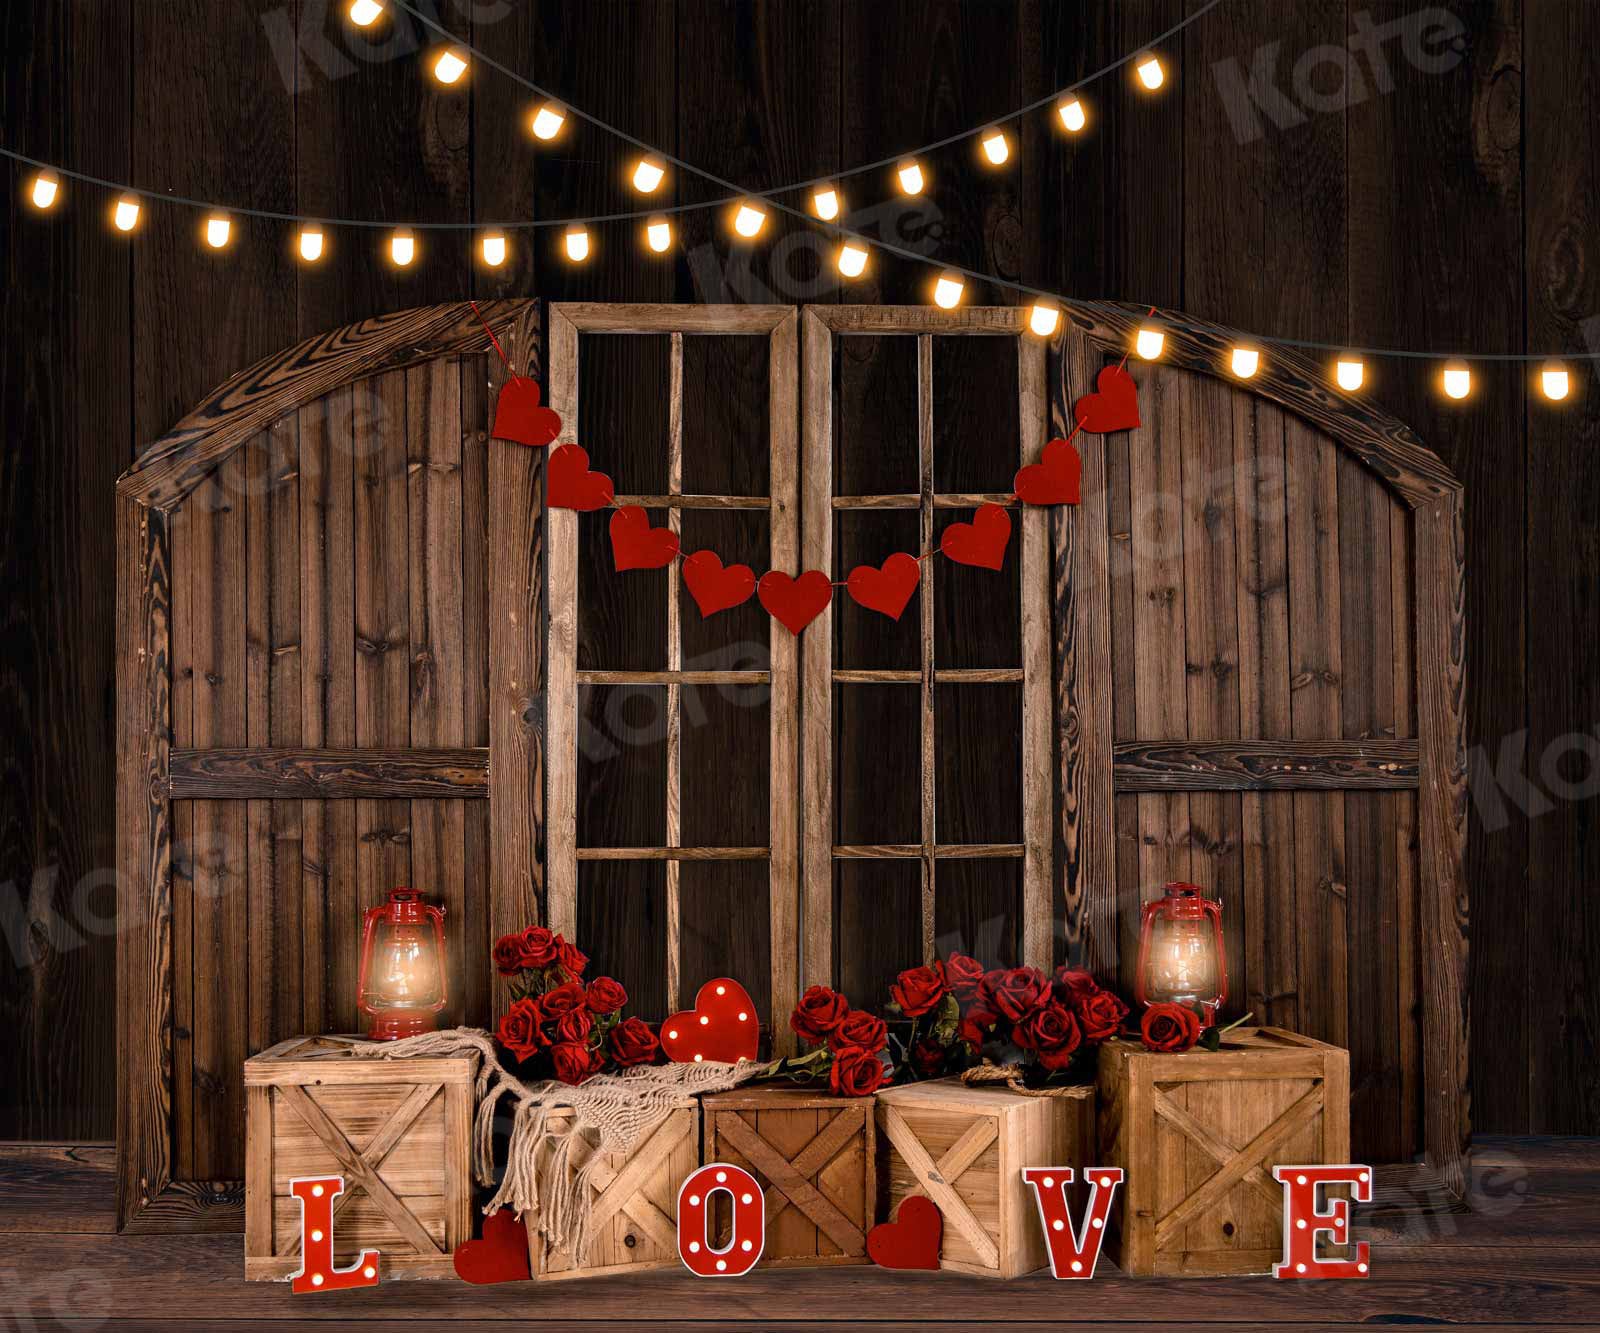 Kate Valentine's day Rose Wood Barn Door Backdrop for Photography